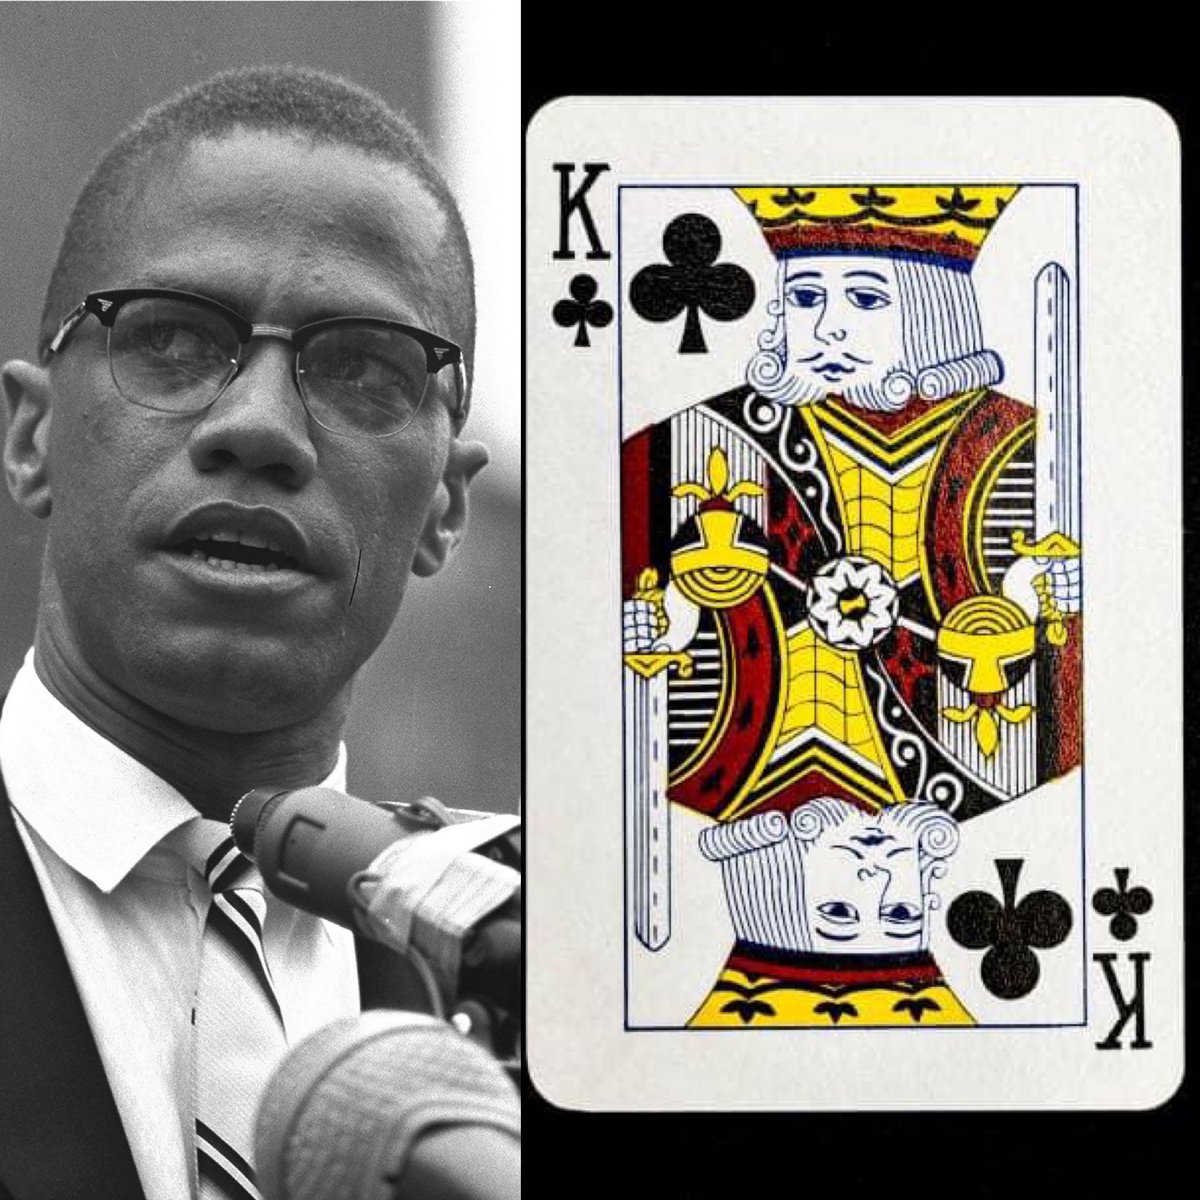 Happy 99th birthday to Malcolm X. Malcolm’s card is the King of Clubs. King of clubs STAND on principle. They don’t mind ruffling feathers when it’s time to stand in truth. King of clubs generally avoid confrontation, but when they decide to confront it’s ON until you’re